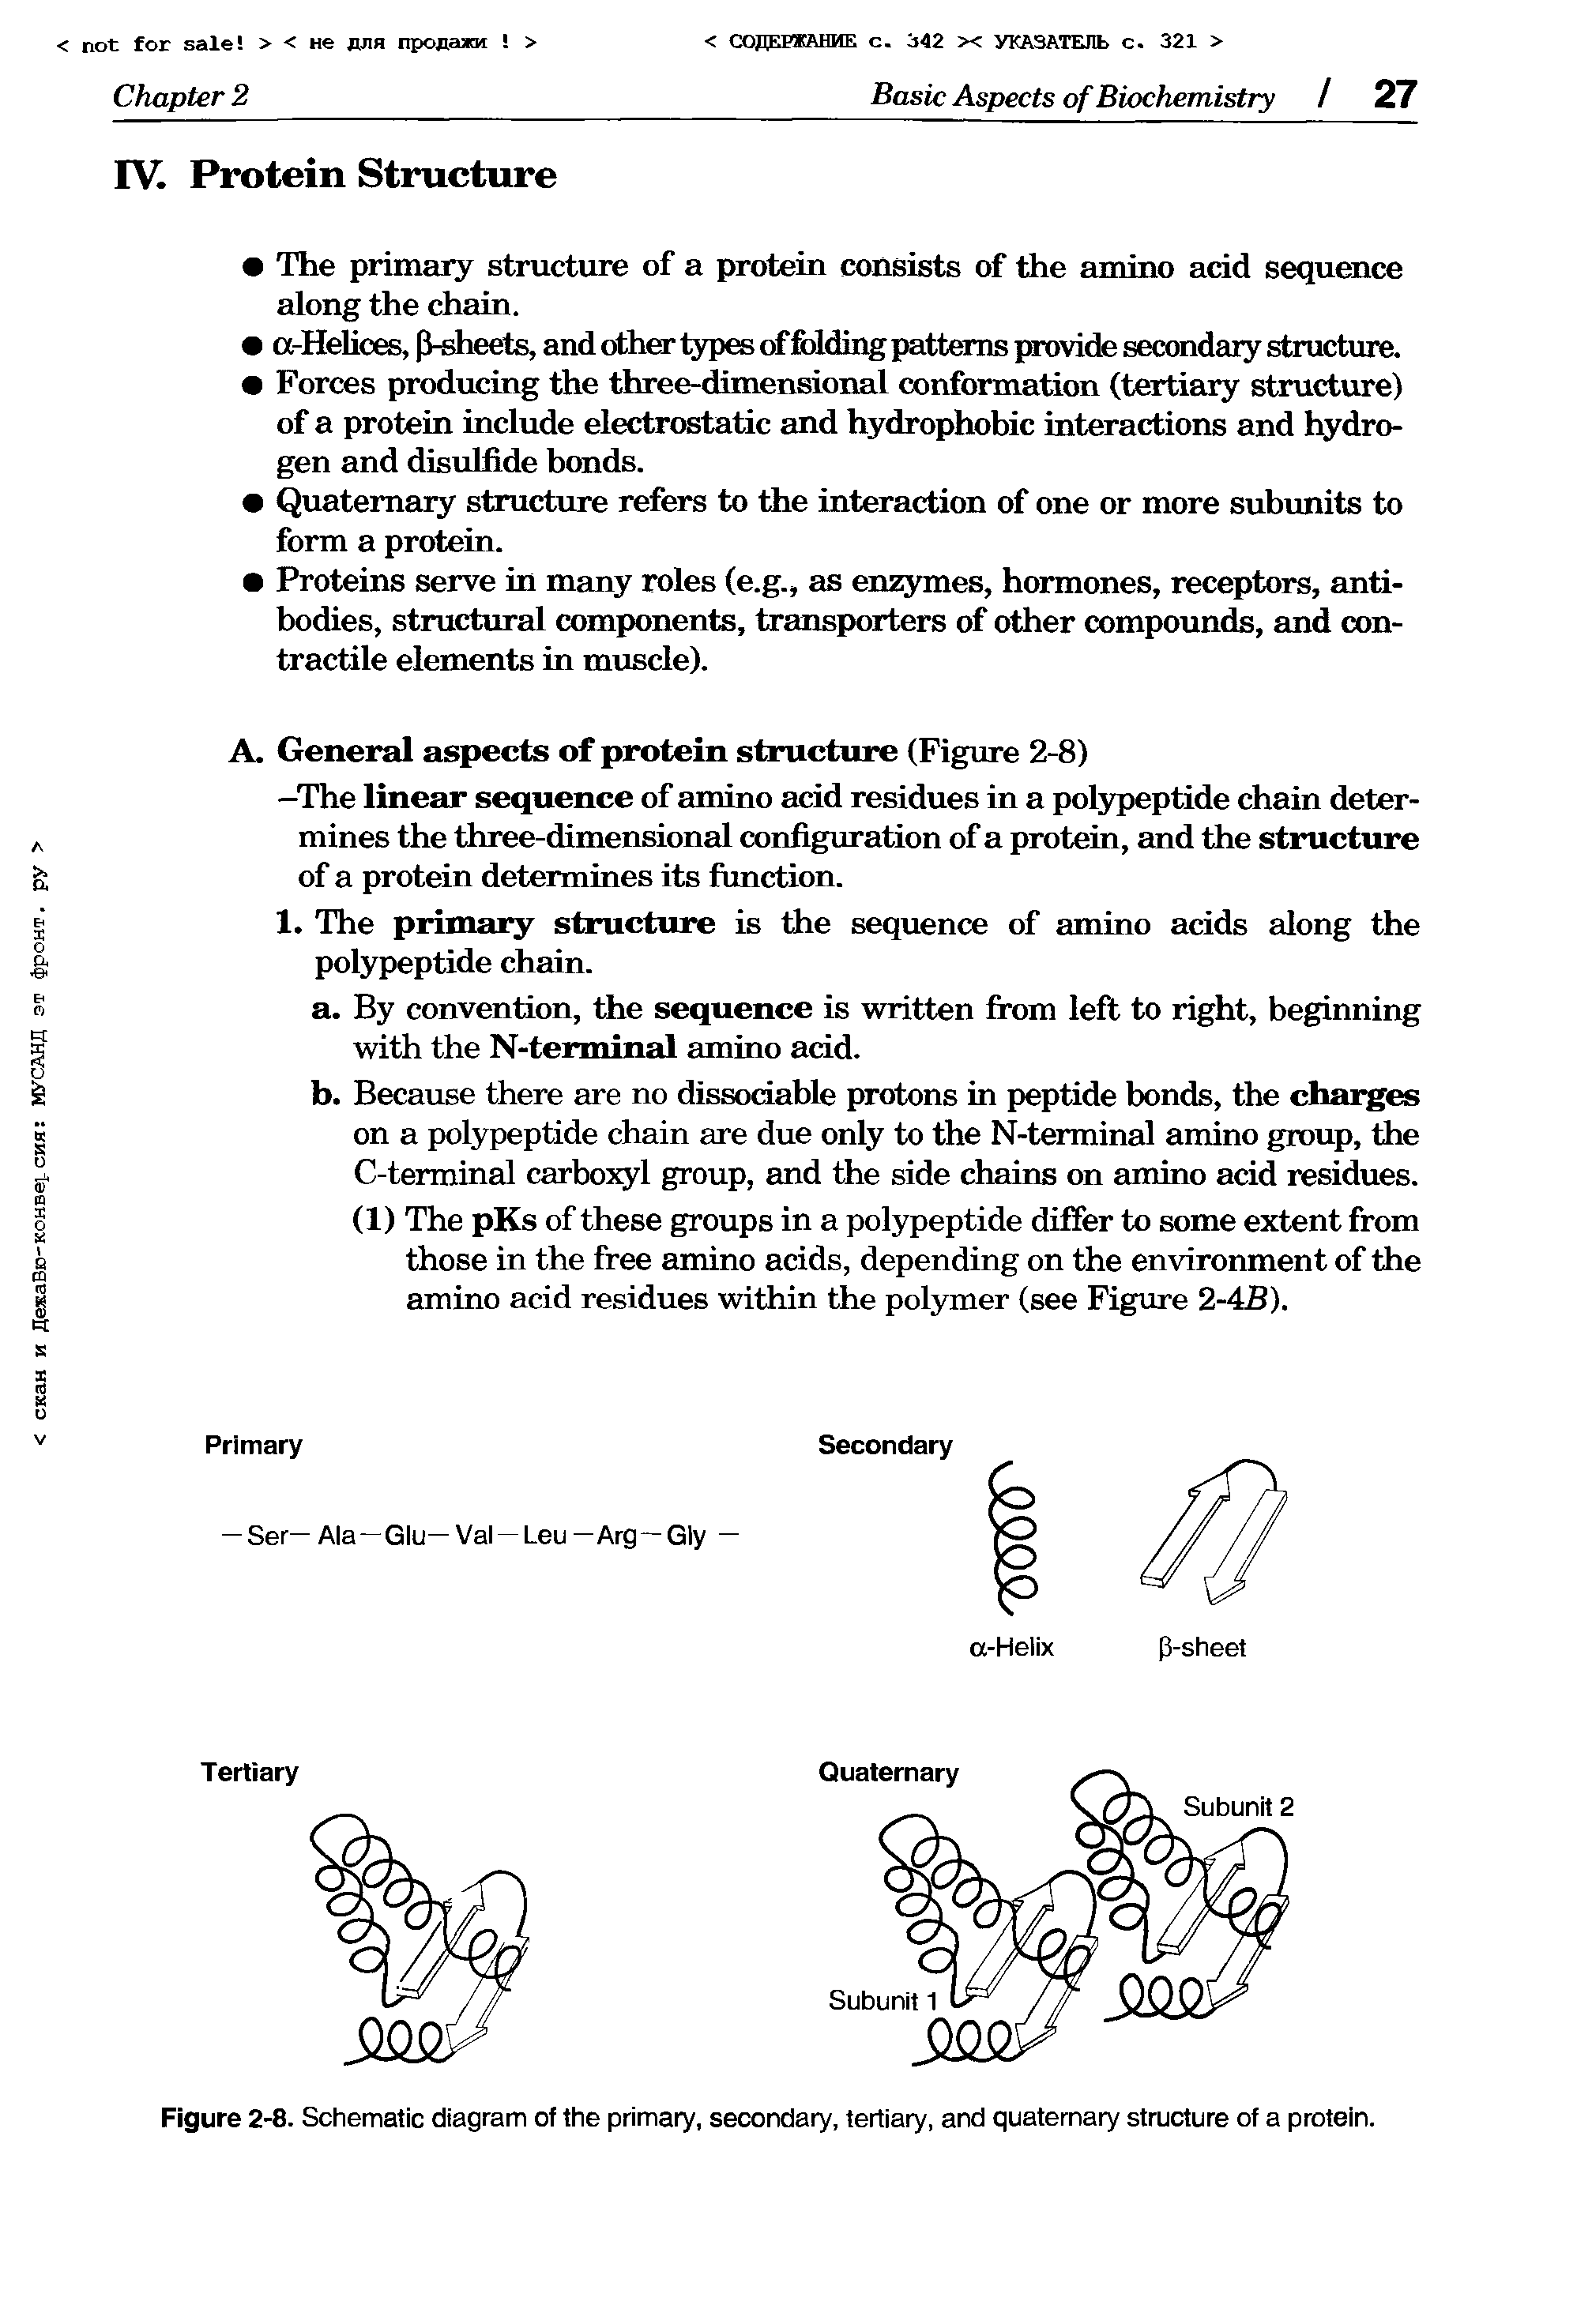 Figure 2-8. Schematic diagram of the primary, secondary, tertiary, and quaternary structure of a protein.